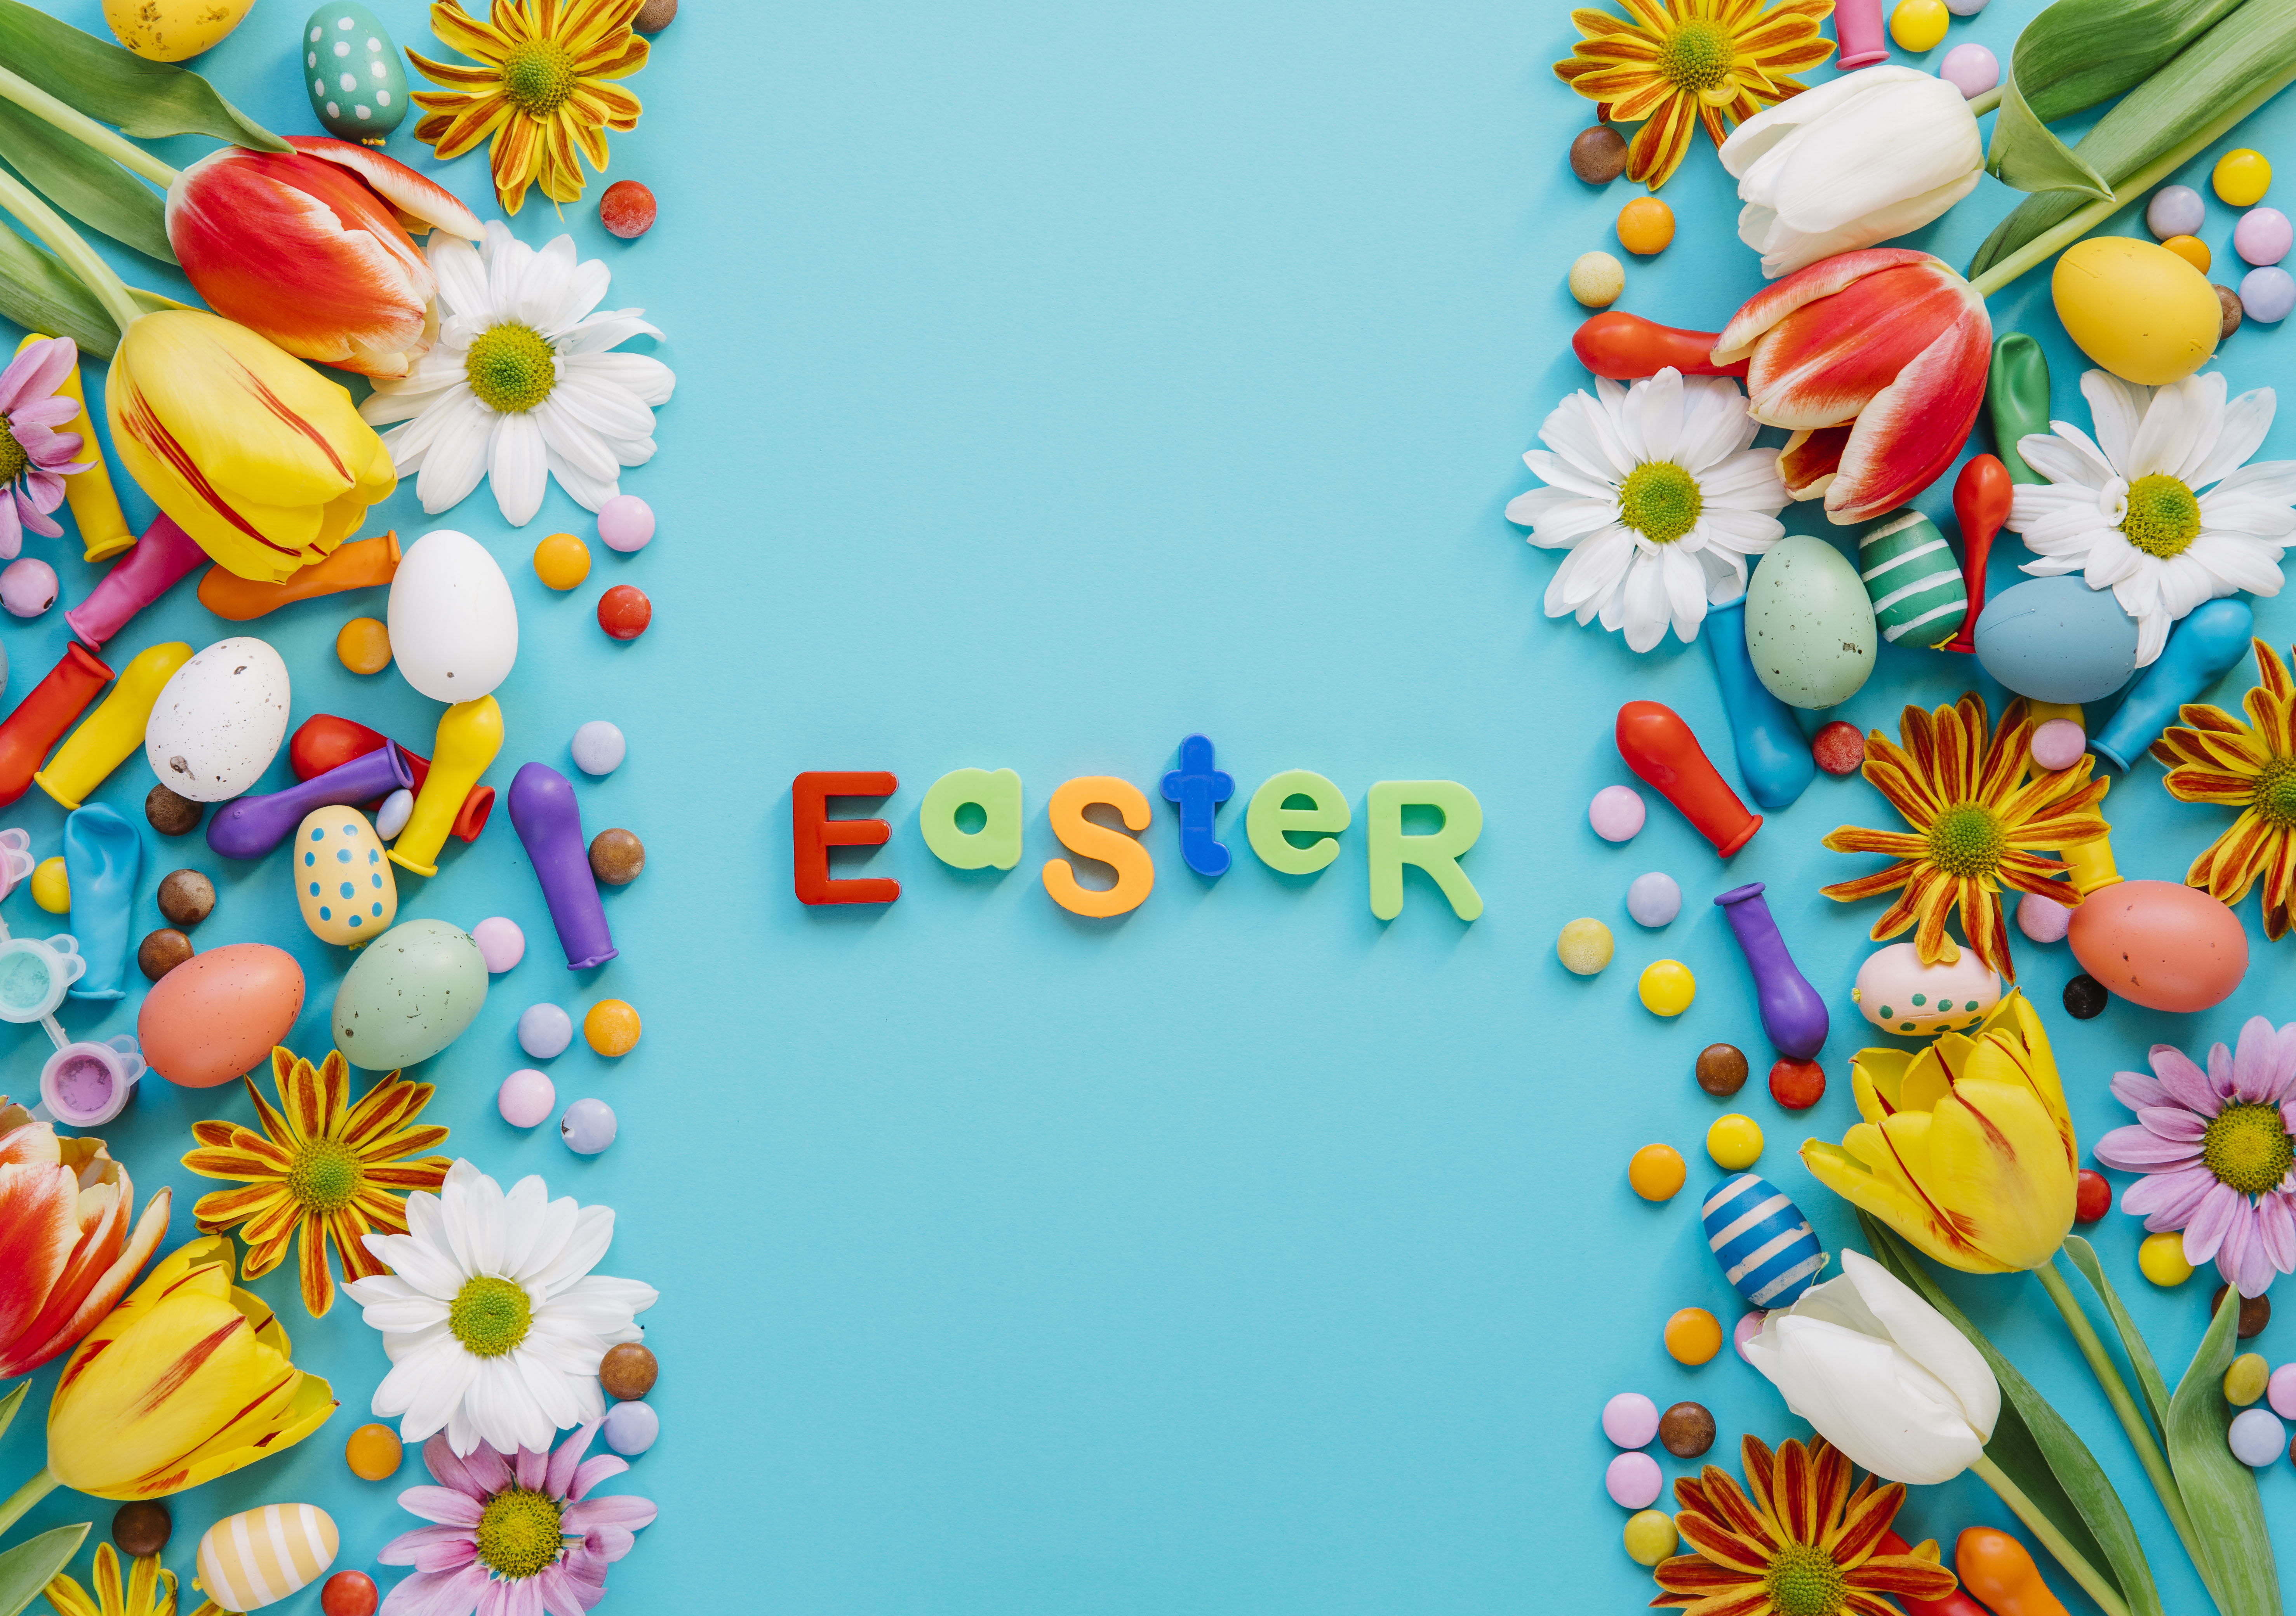 Wallpapers easter wallpaper truly resurrected holidays on the desktop